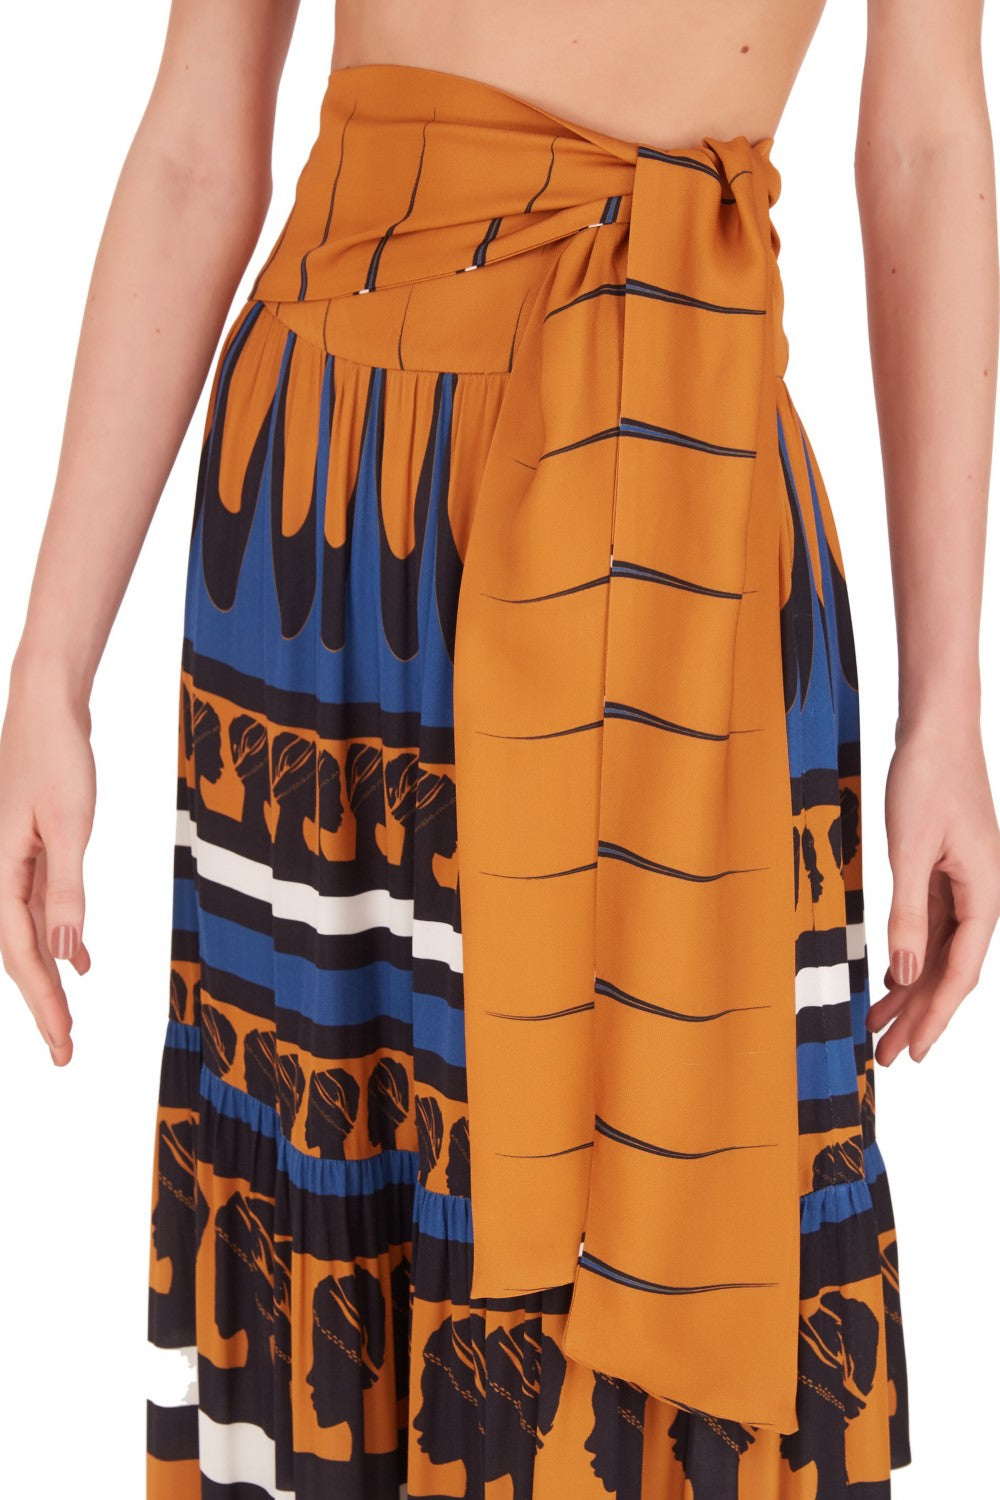 Crafted from viscose this waist-tie skirt is cut to a high-rise silhouette and features La Africana head in blue, yellow and black